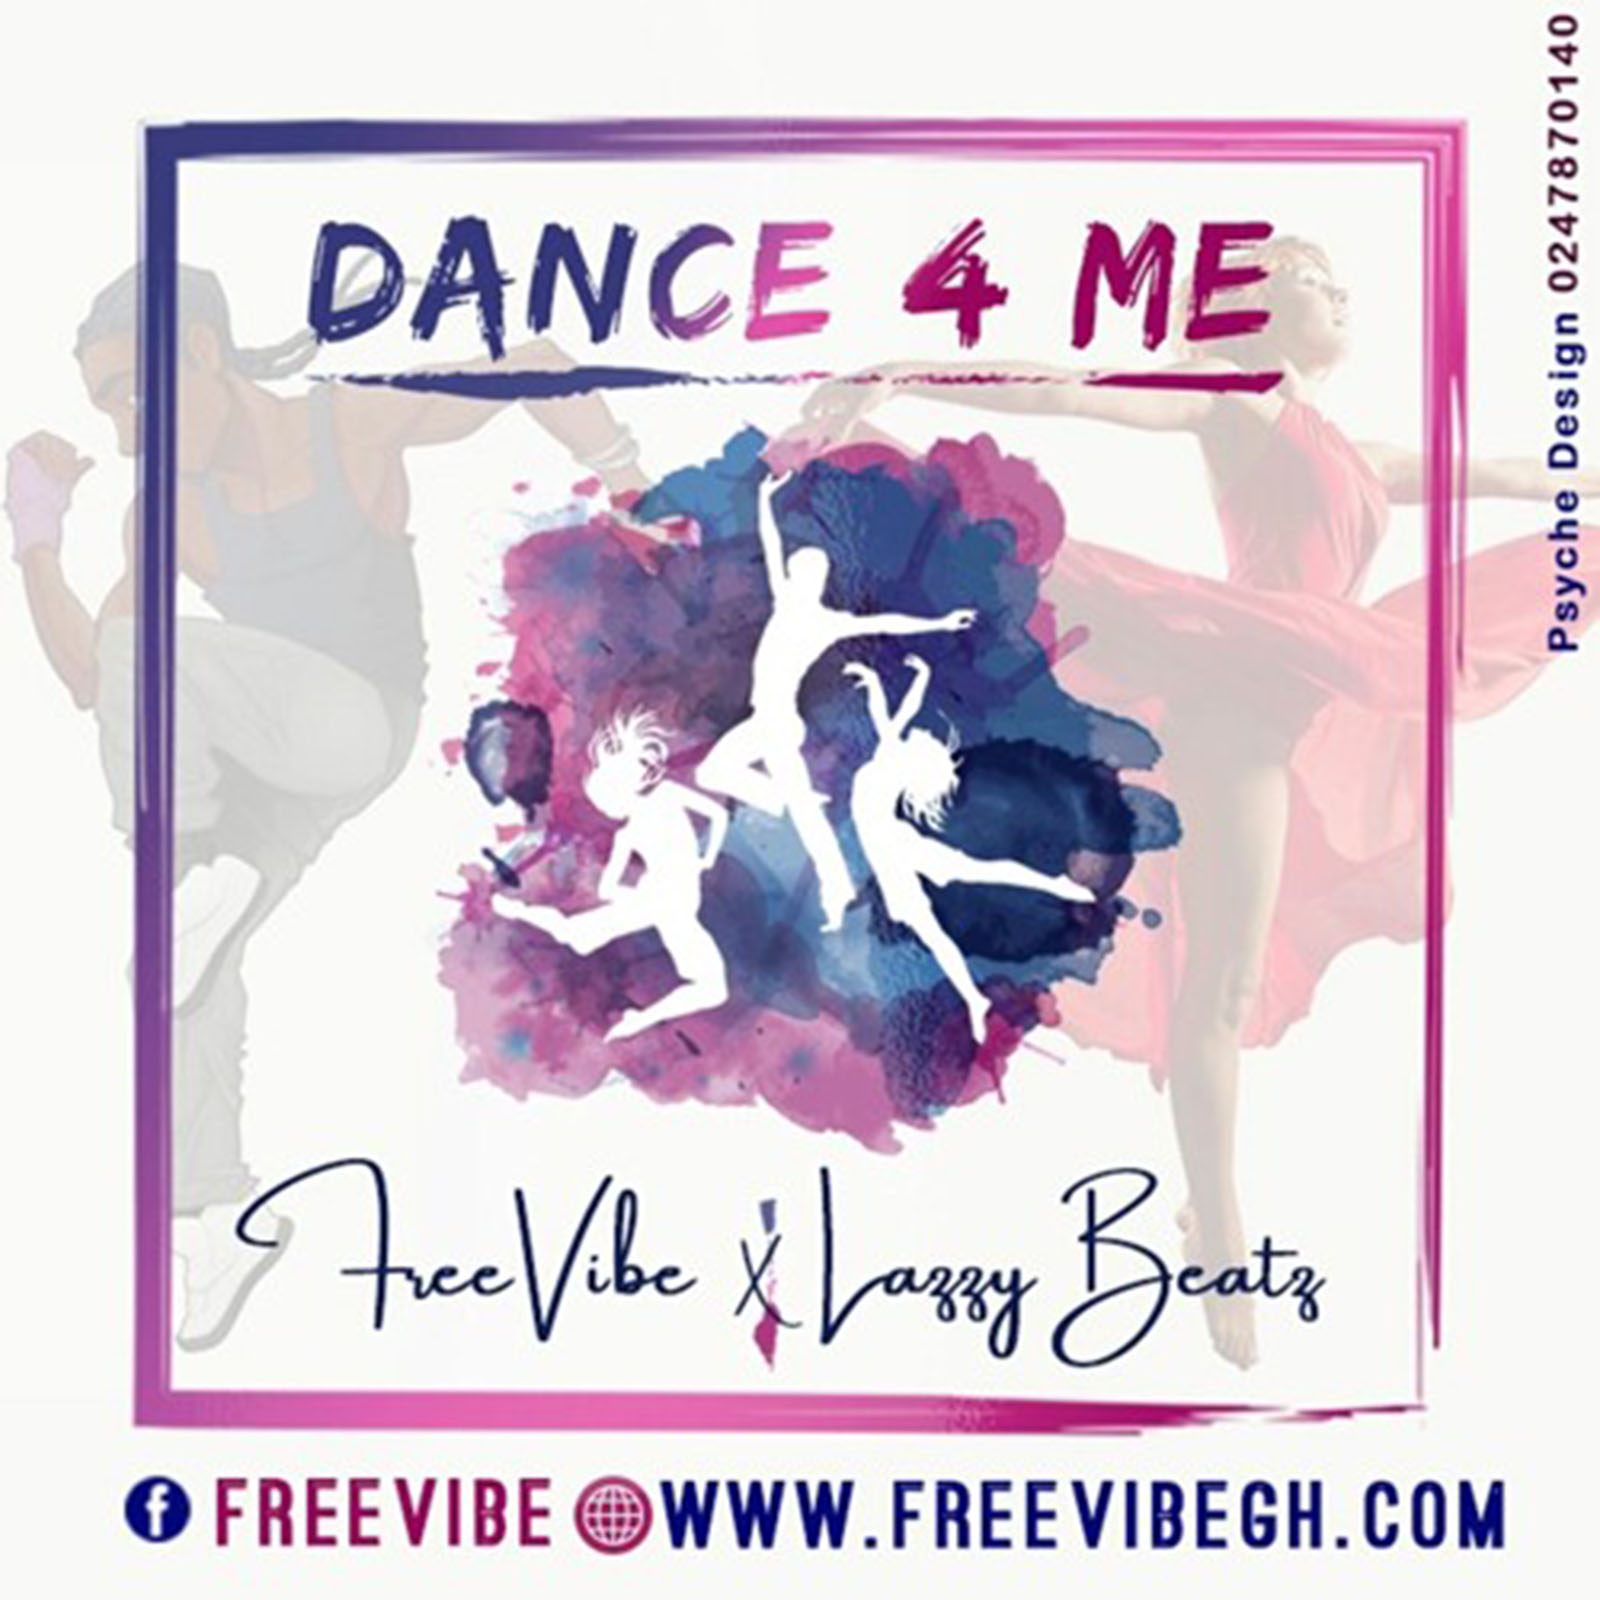 Dance 4 Me by FreeVibe feat. Lazzy Beatz